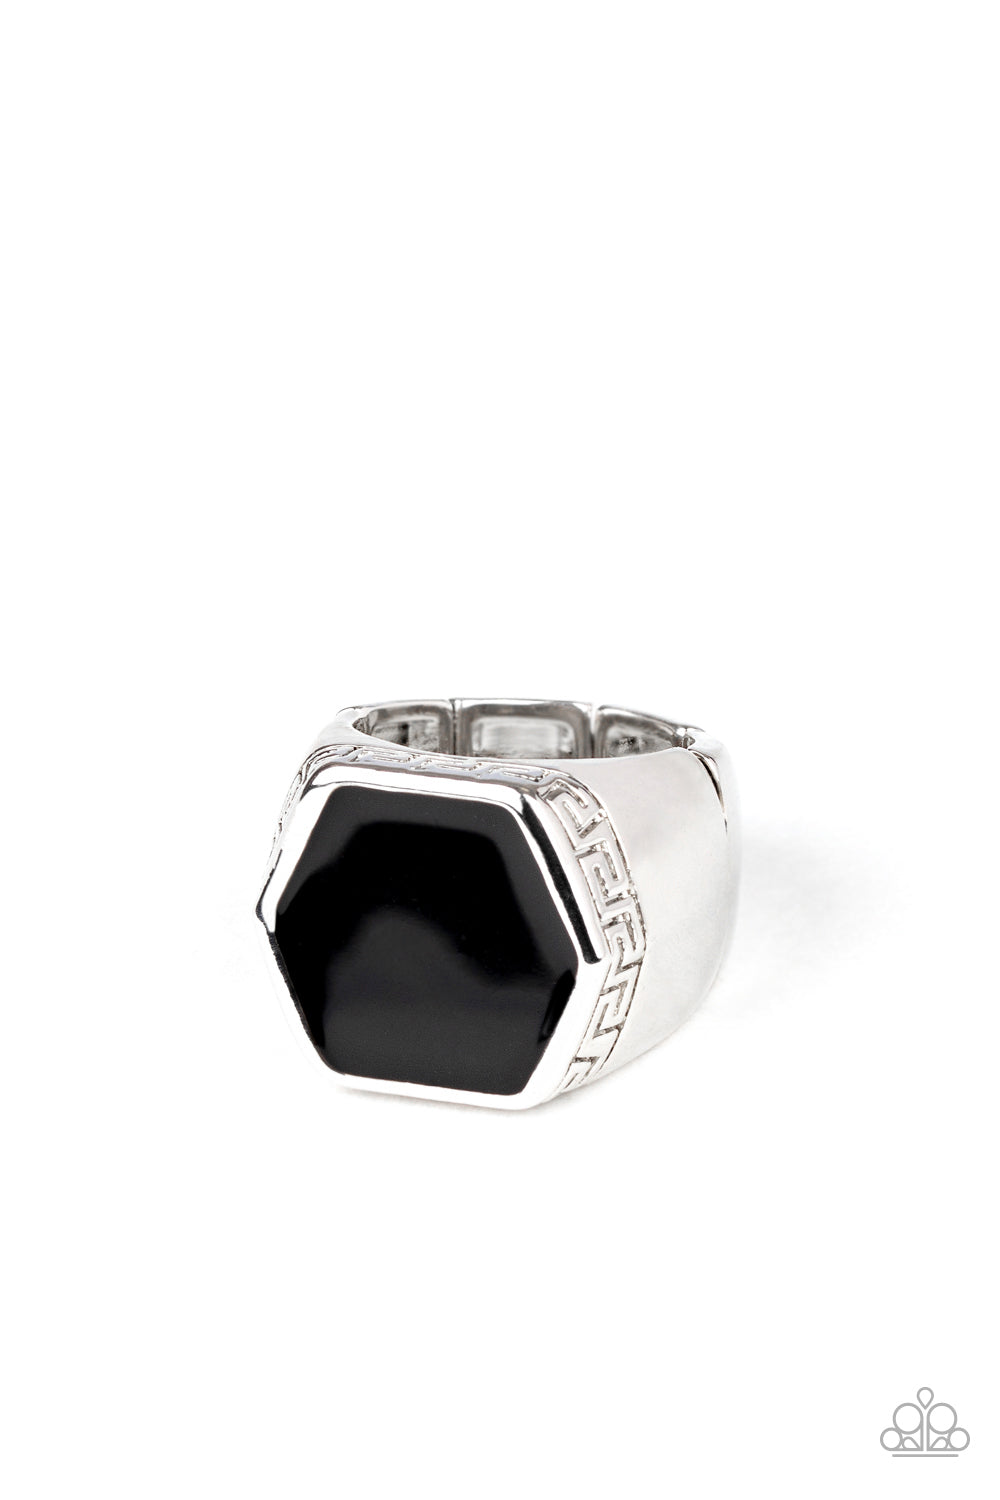 HEX Out - Black ***COMING SOON*** - Bling With Crystal